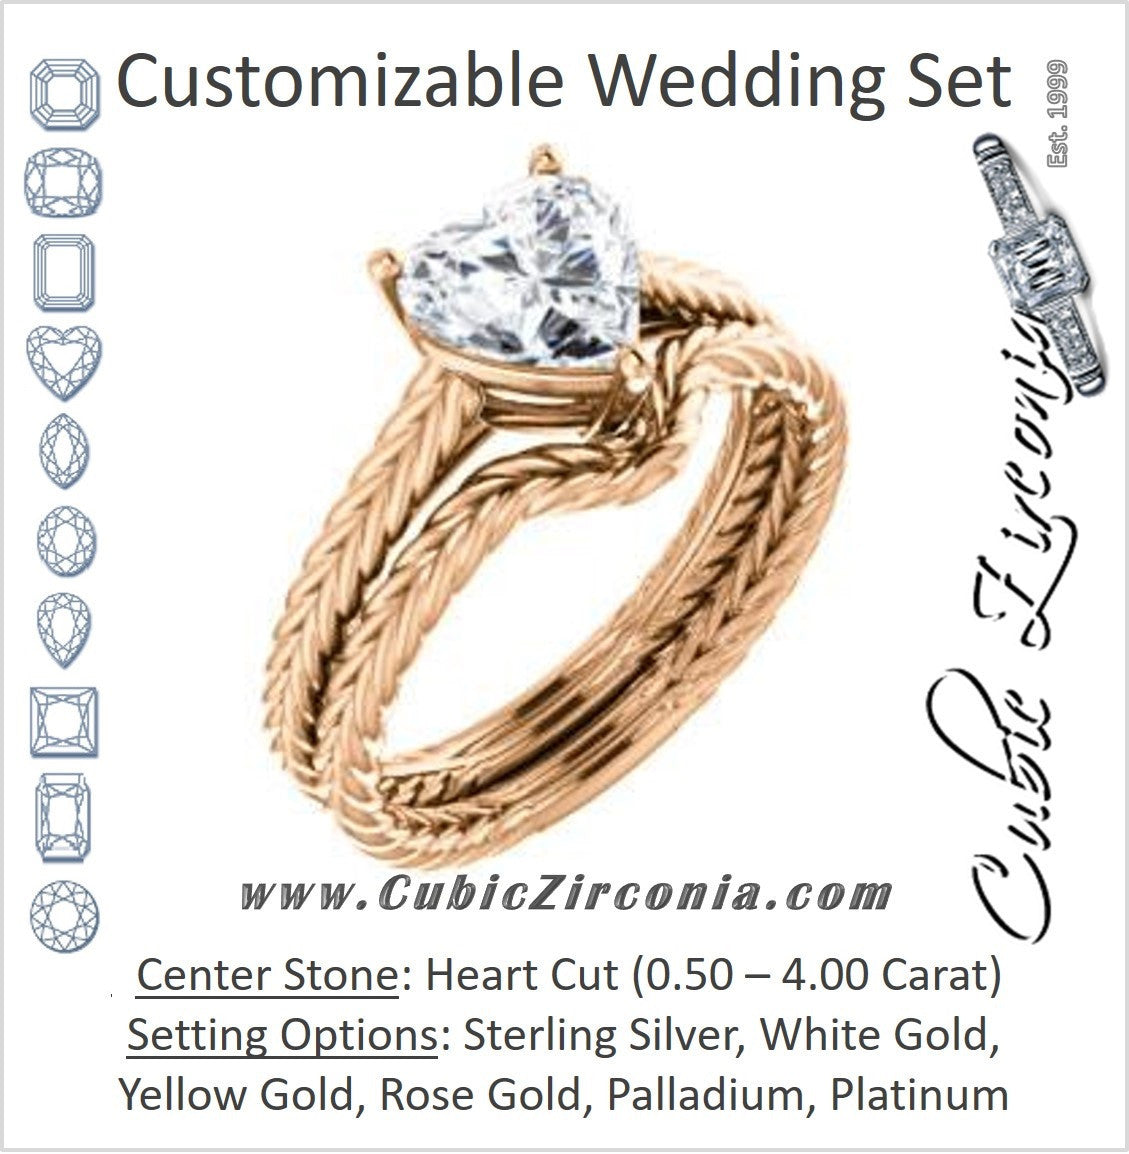 CZ Wedding Set, featuring The Florence engagement ring (Customizable Cathedral-set Heart Cut Solitaire with Vintage Braided Metal Band)